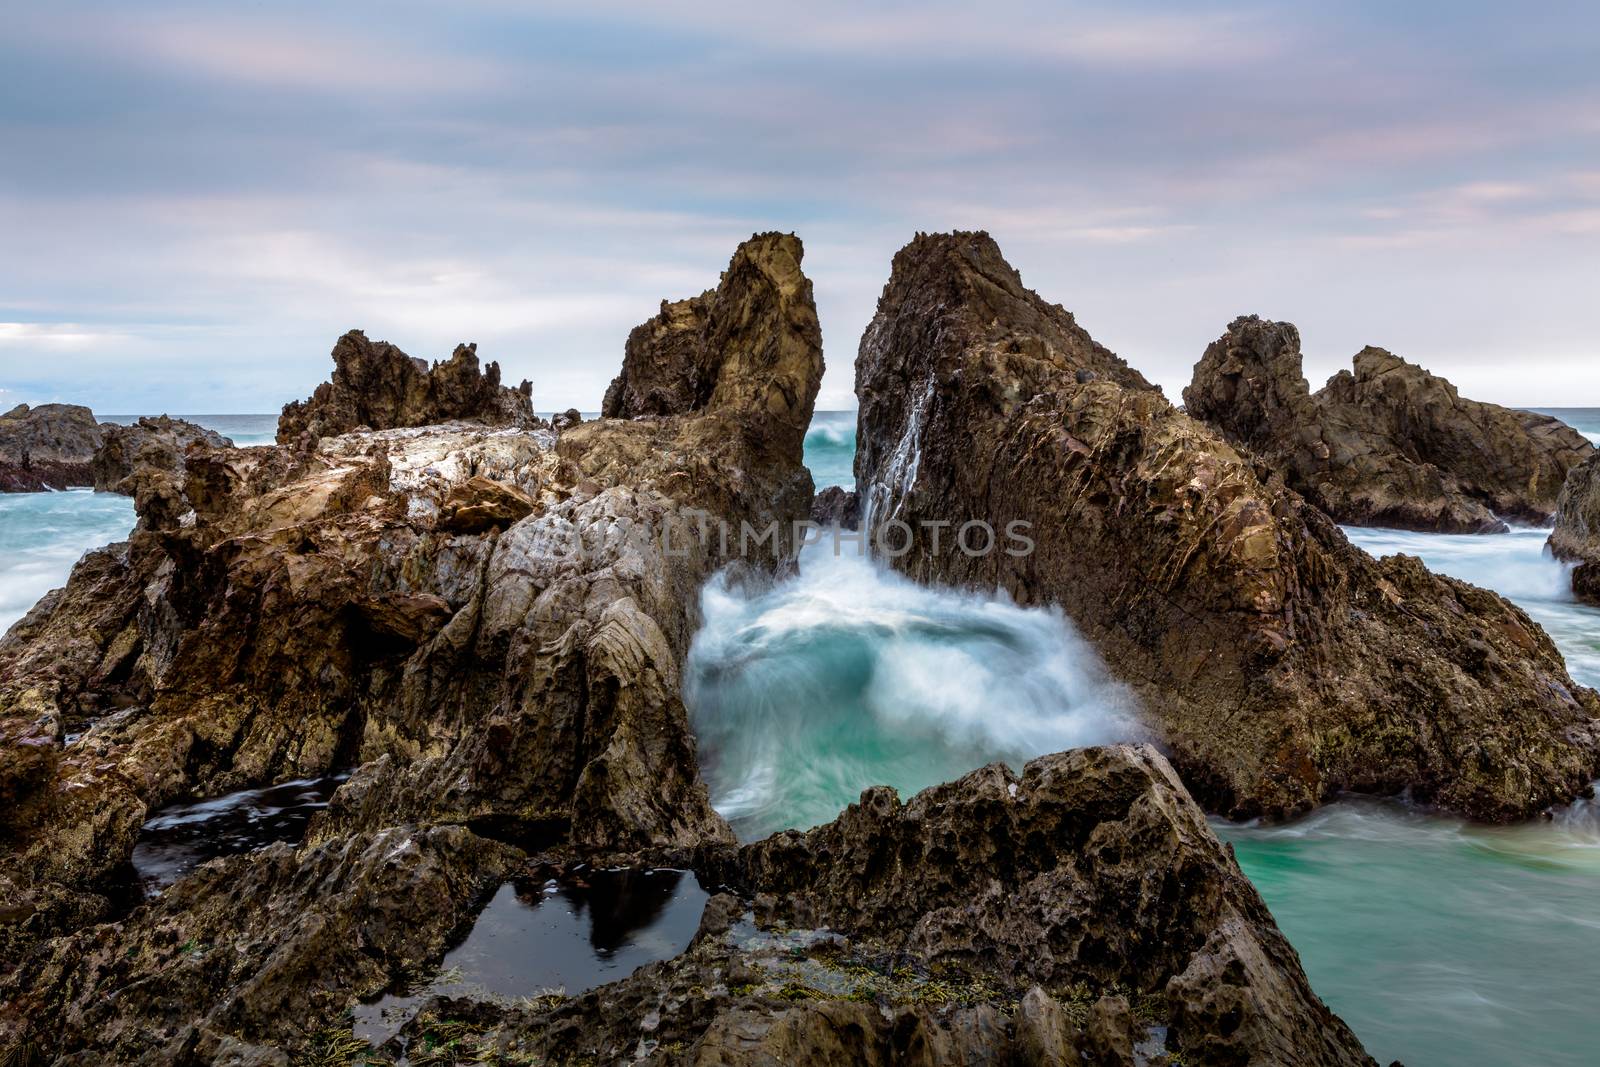 Ocean waves pushing through the dramatic jagged rock gap channel by lovleah